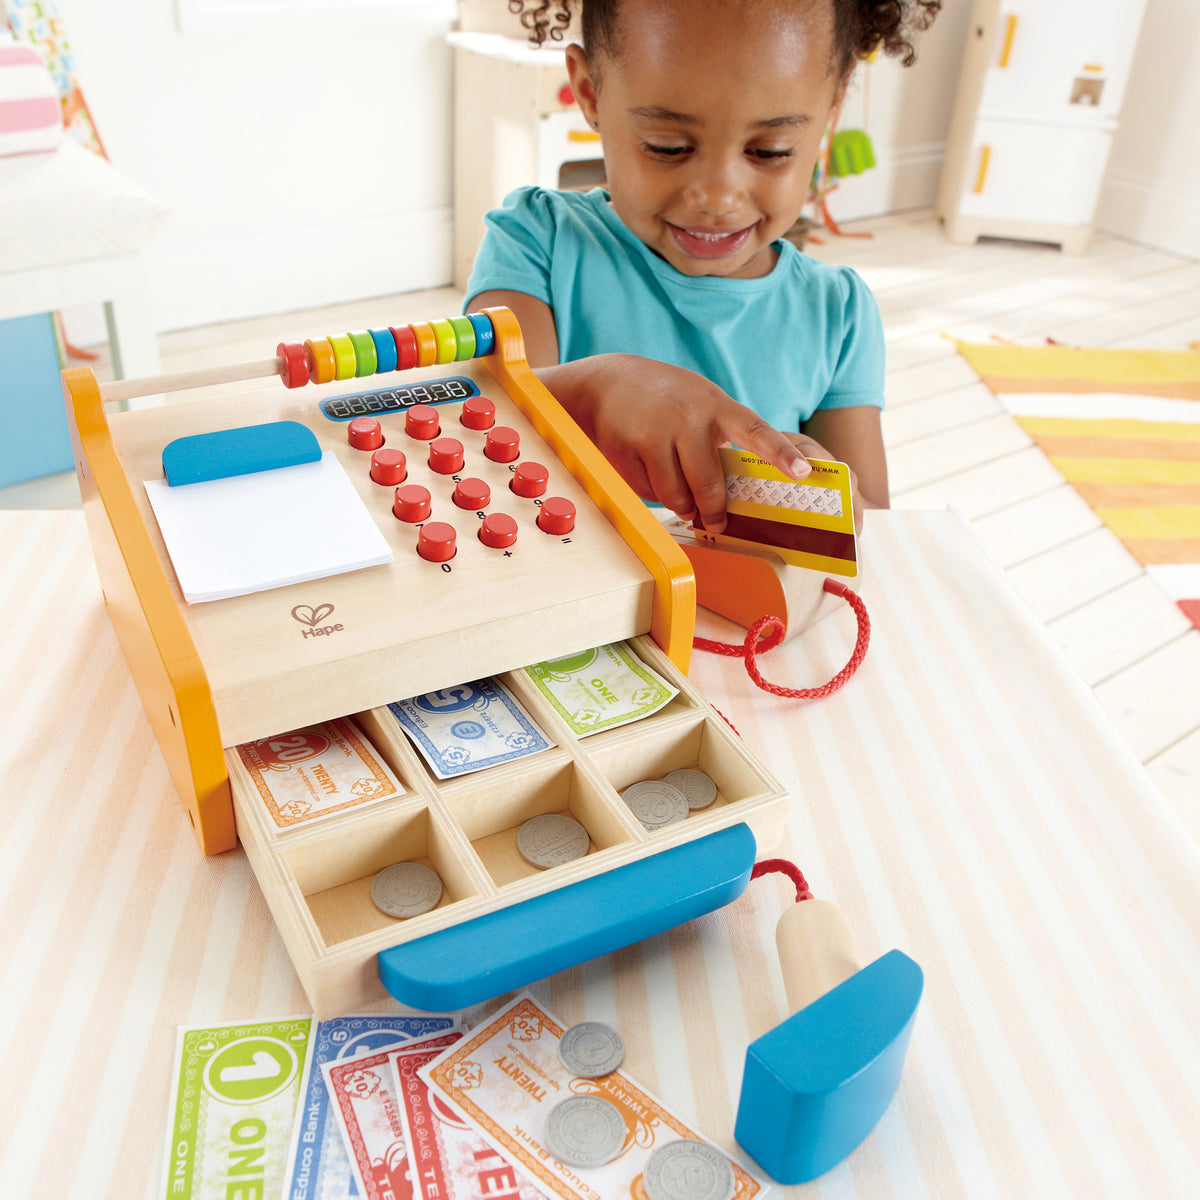 Child enjoying playing pretend swiping her credit card with cash register open showing pretend play money in till